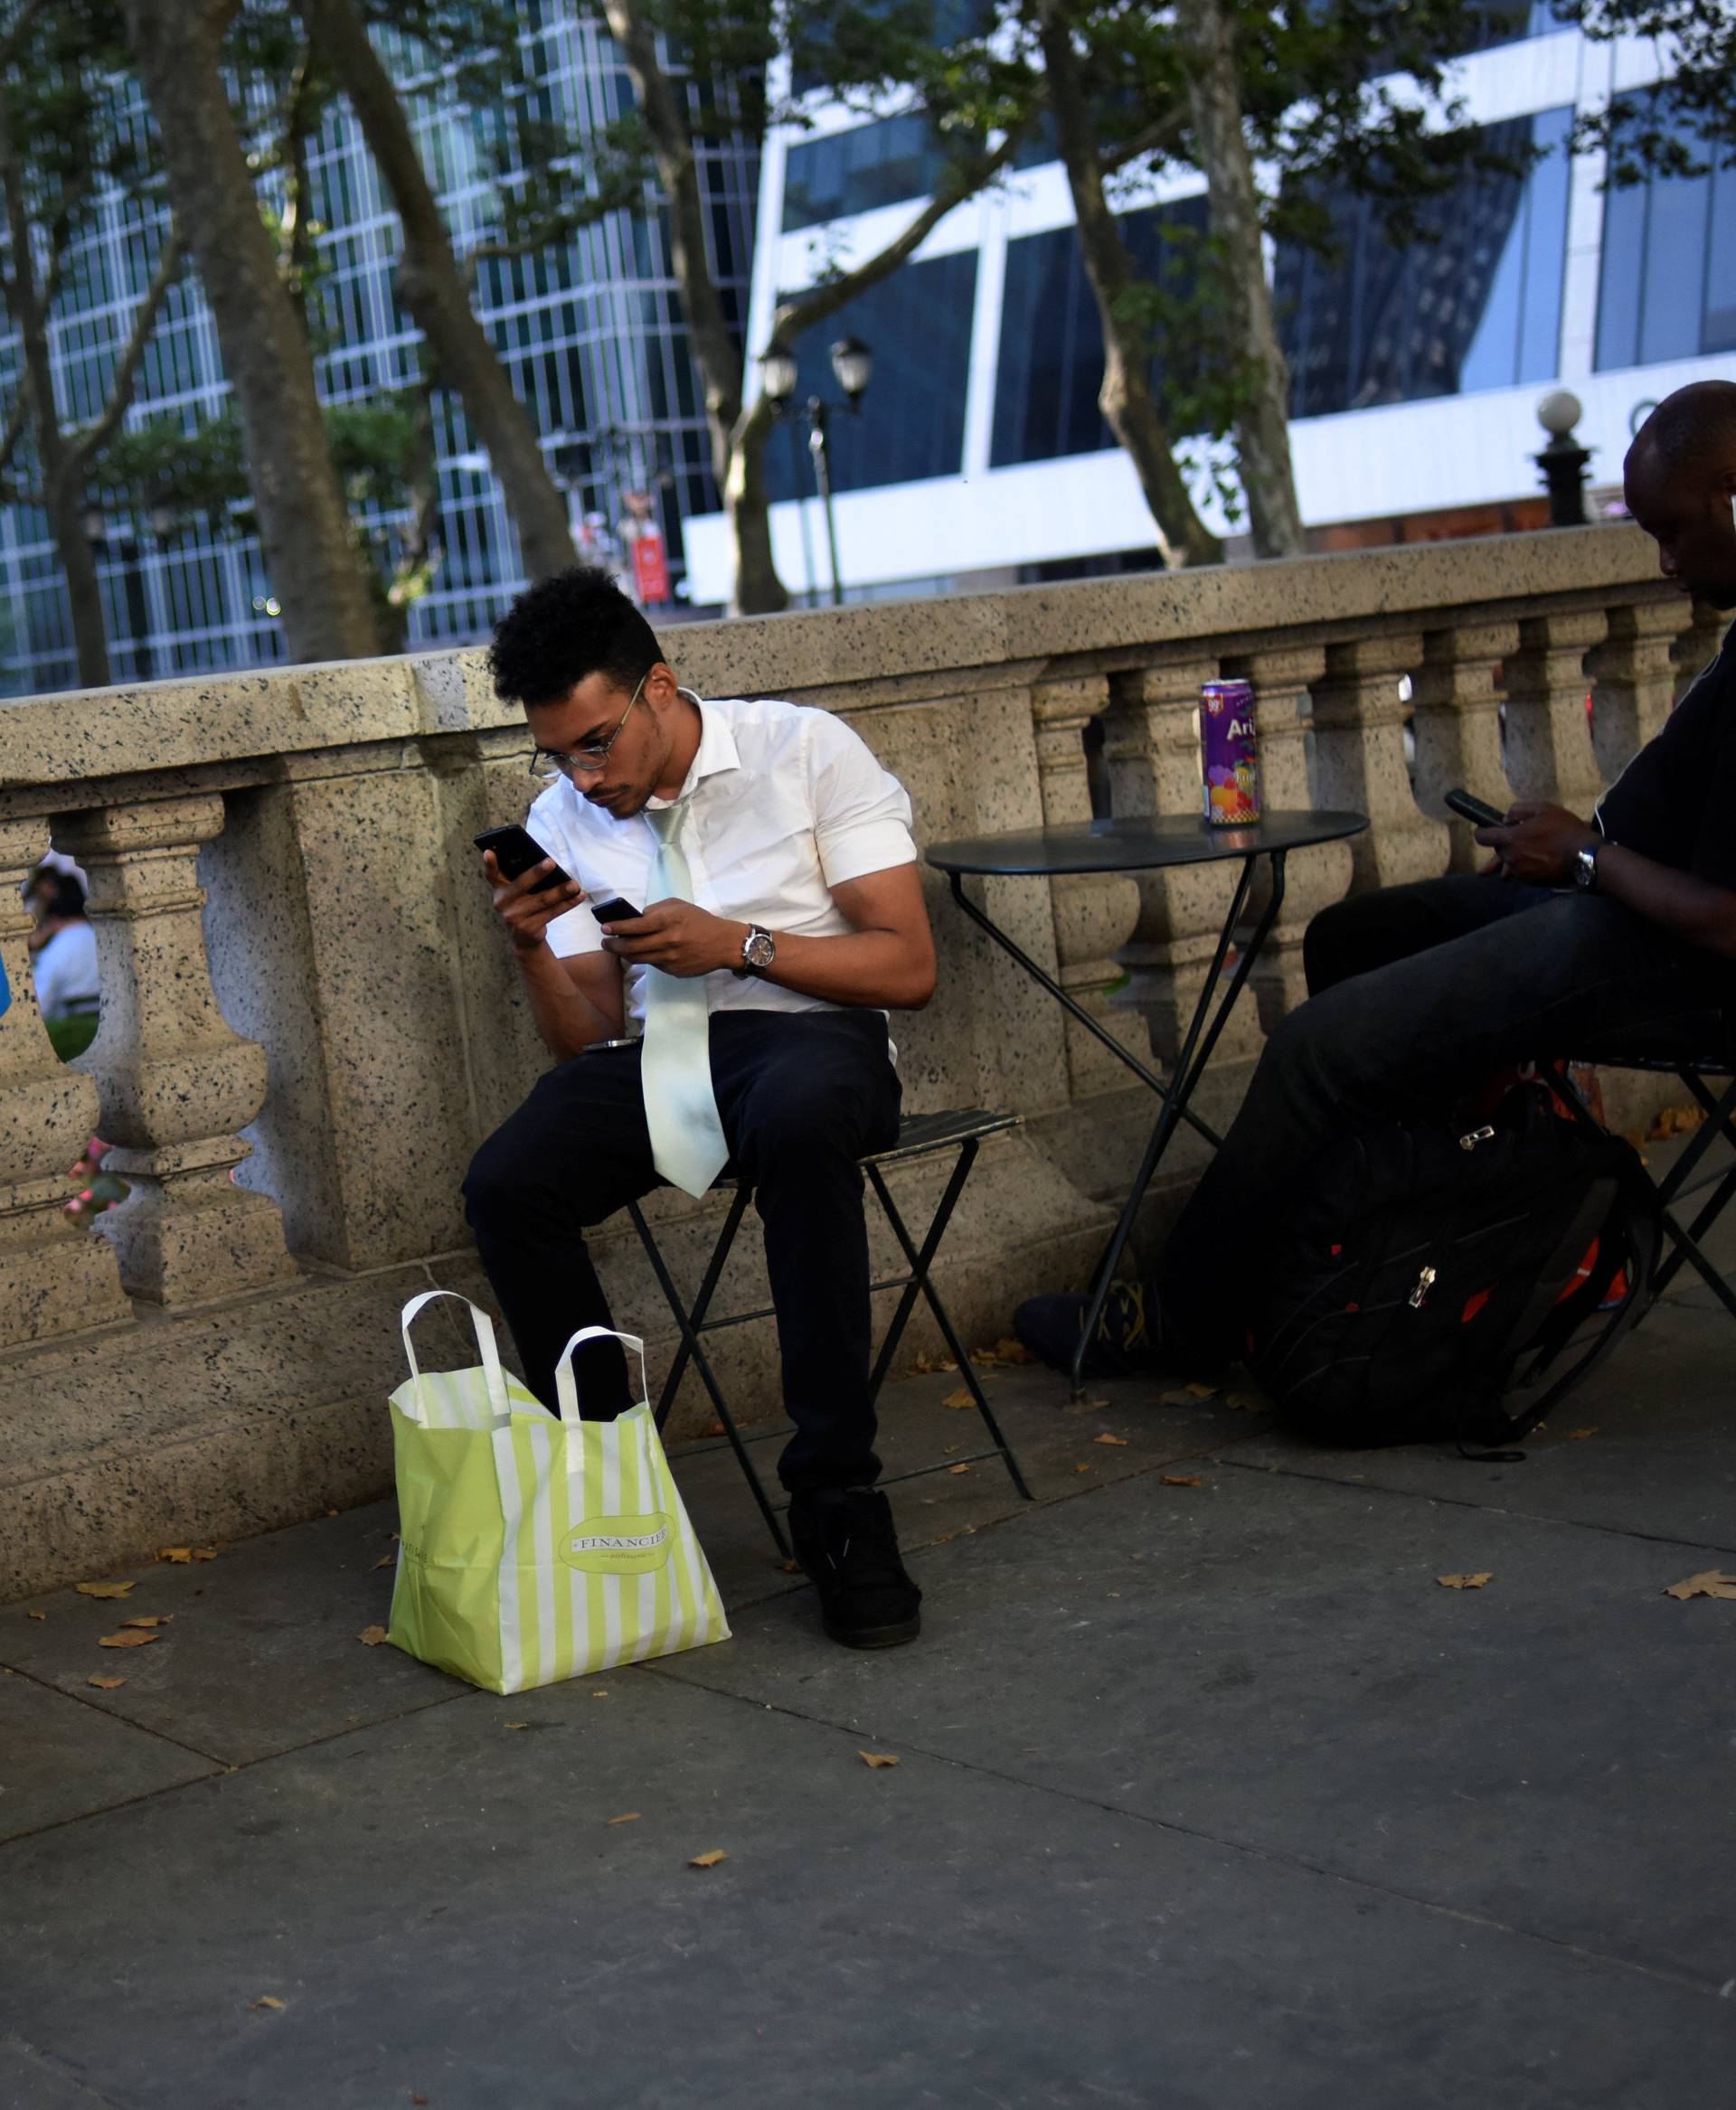 David Melendez uses three phones as he plays the augmented reality mobile game "Pokemon Go" by Nintendo in New York City